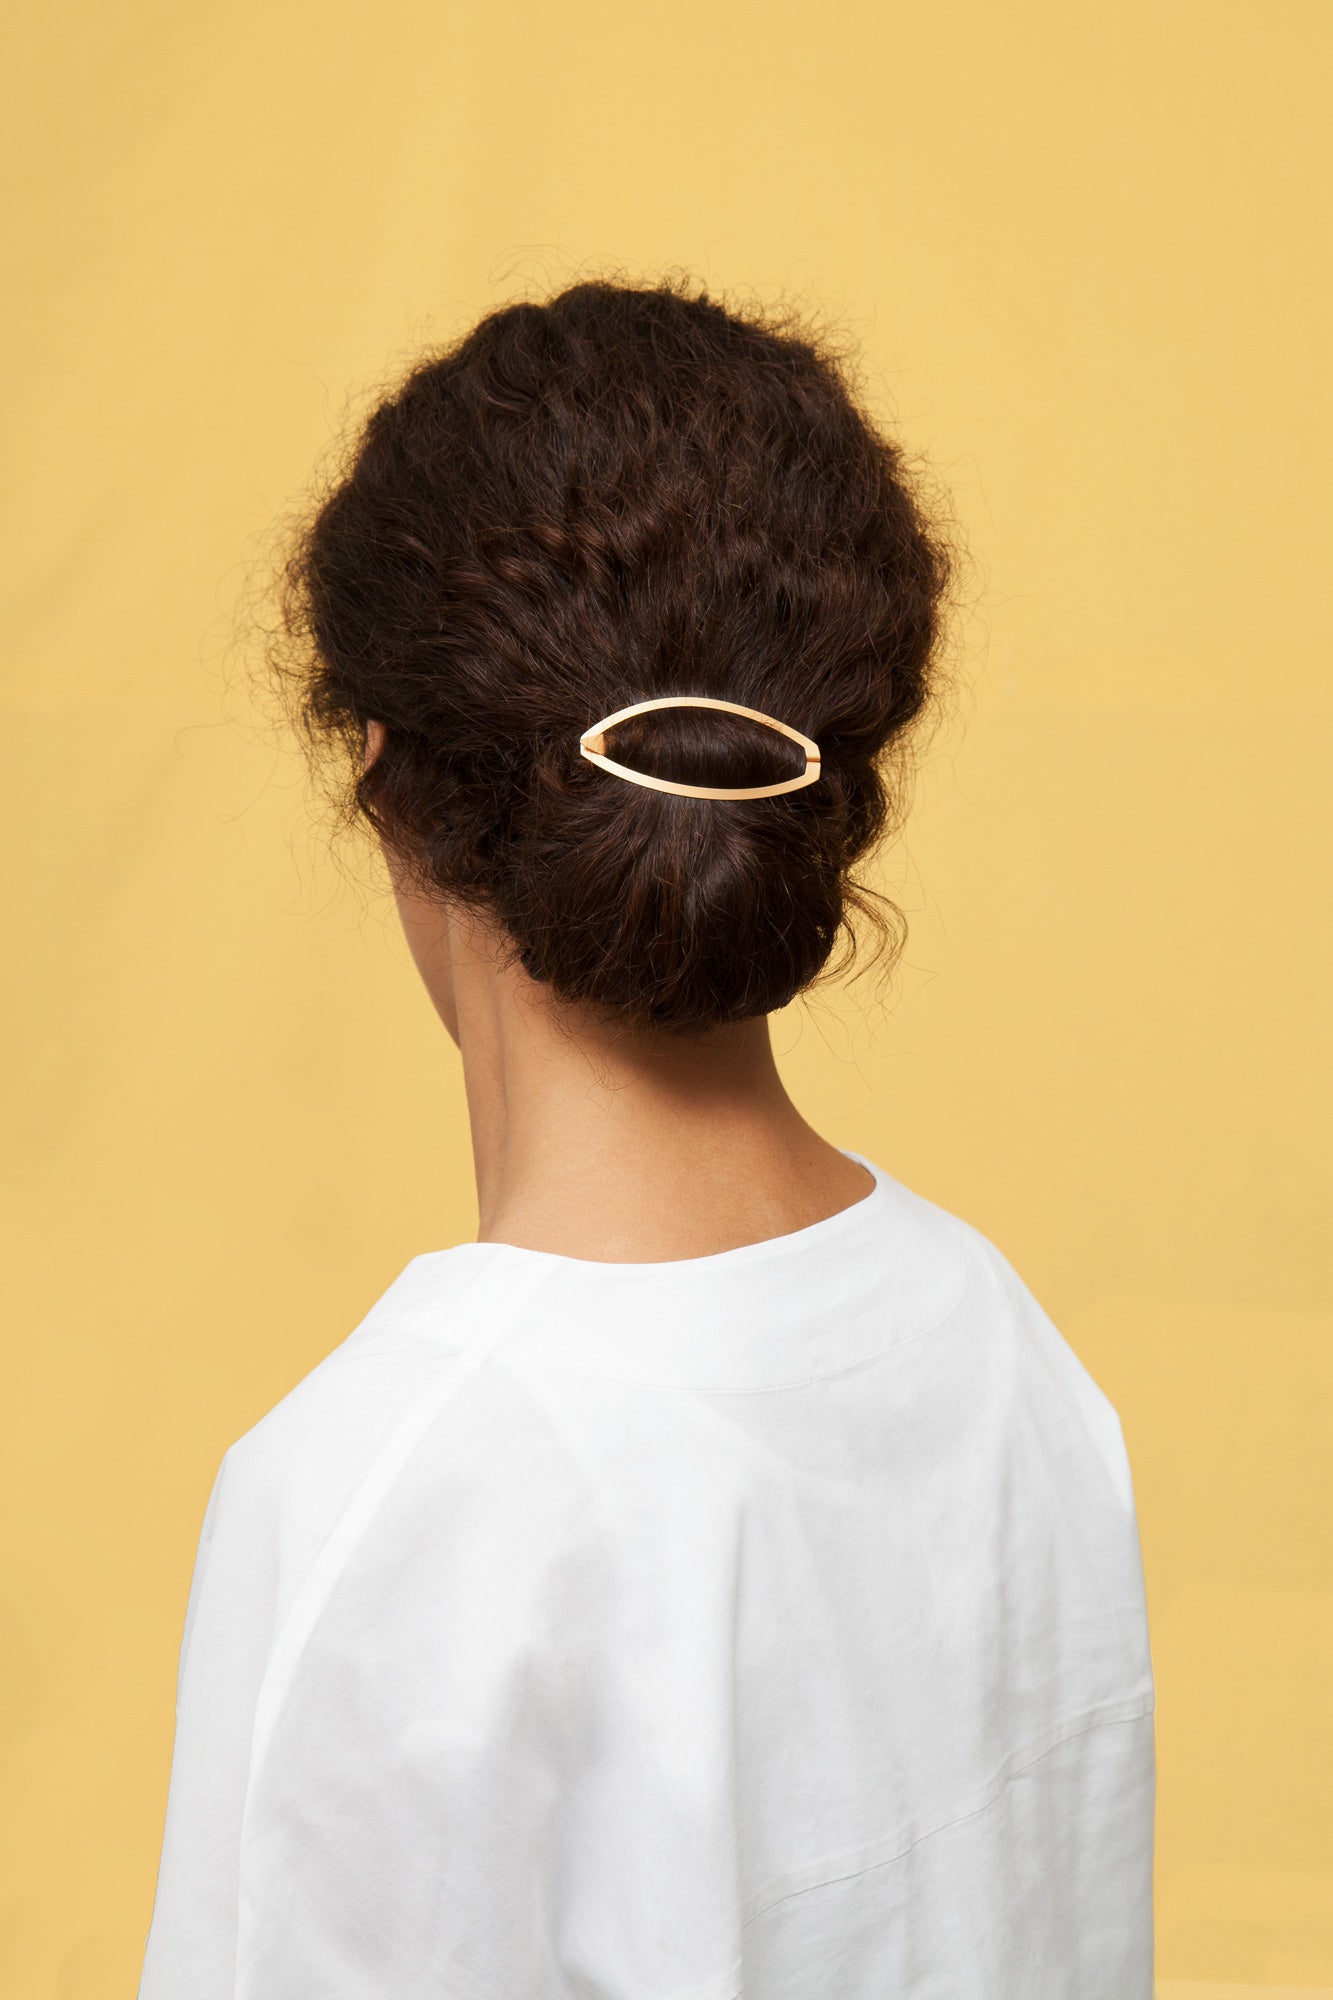 A neat low knot secured with the ALVA designer hairclip. Made from high quality materials designed to last